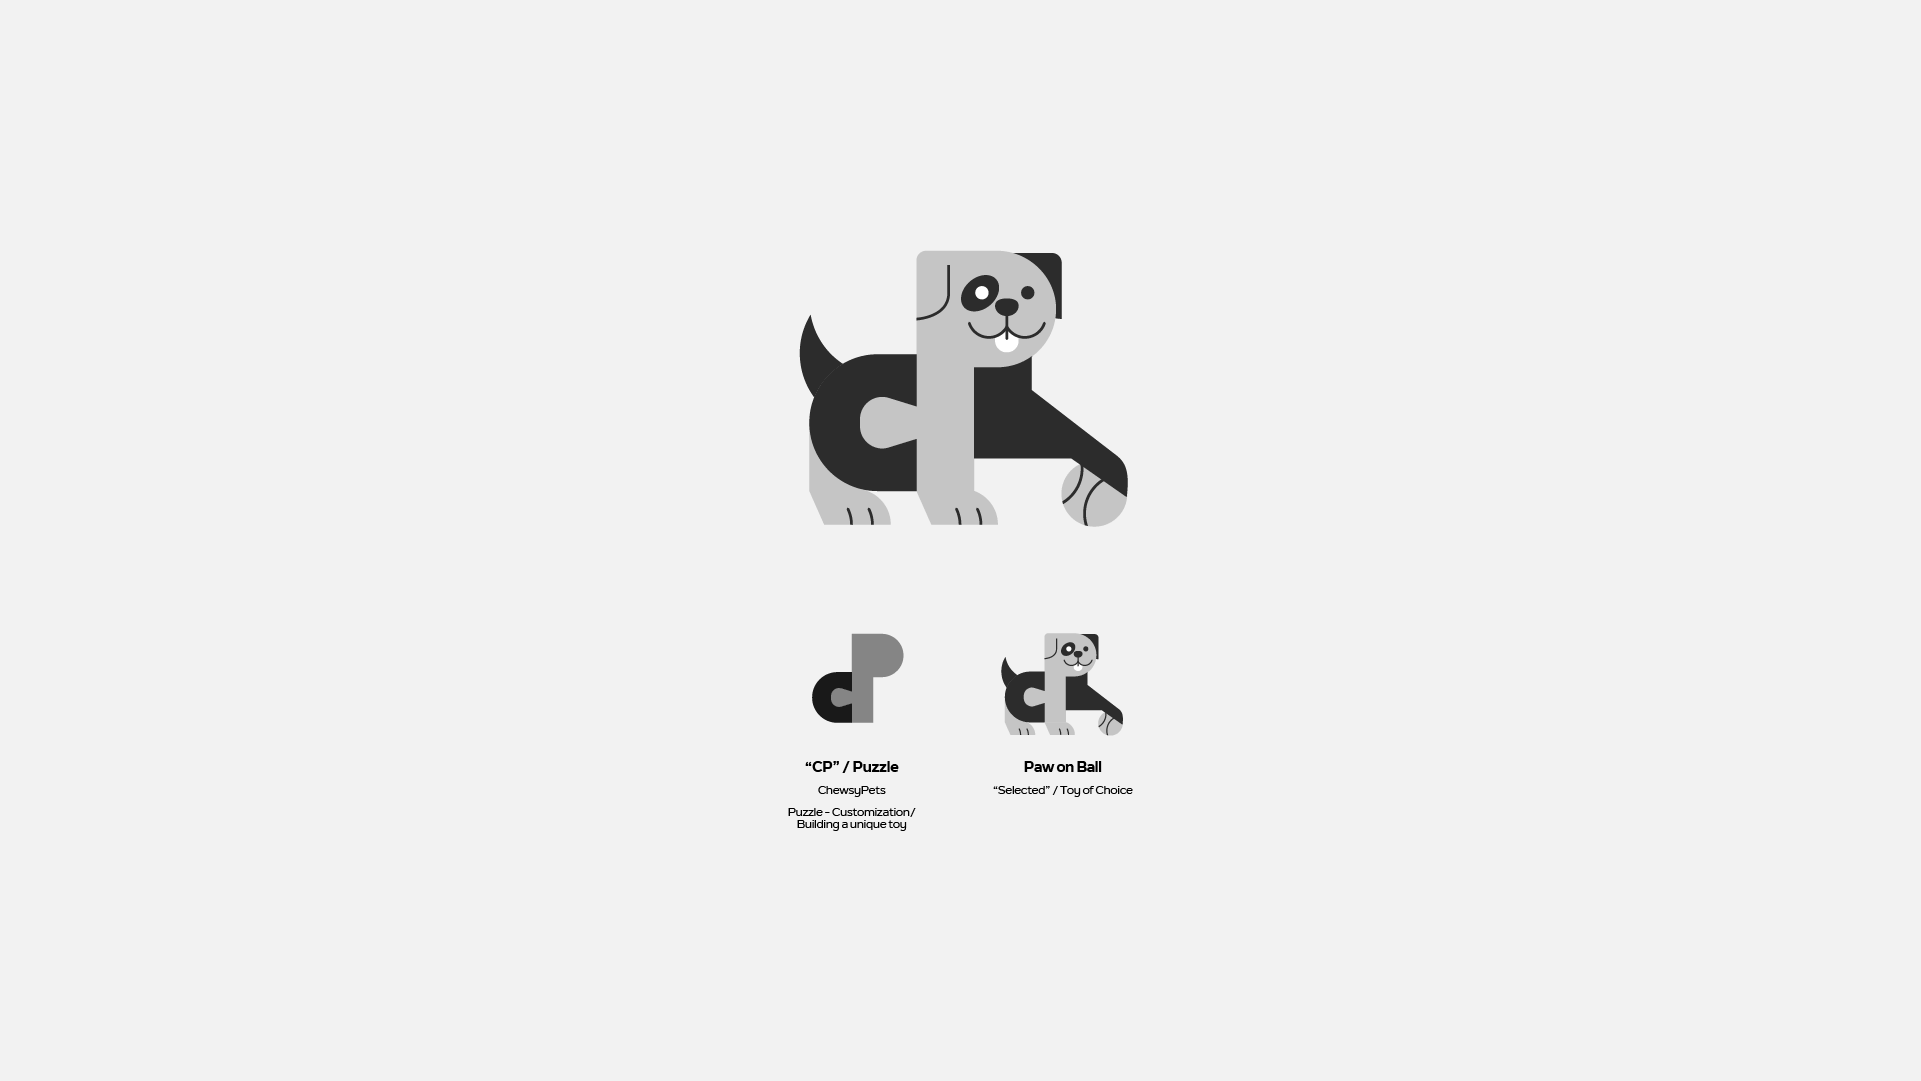 featured image four:ChewsyPets Brand Identity